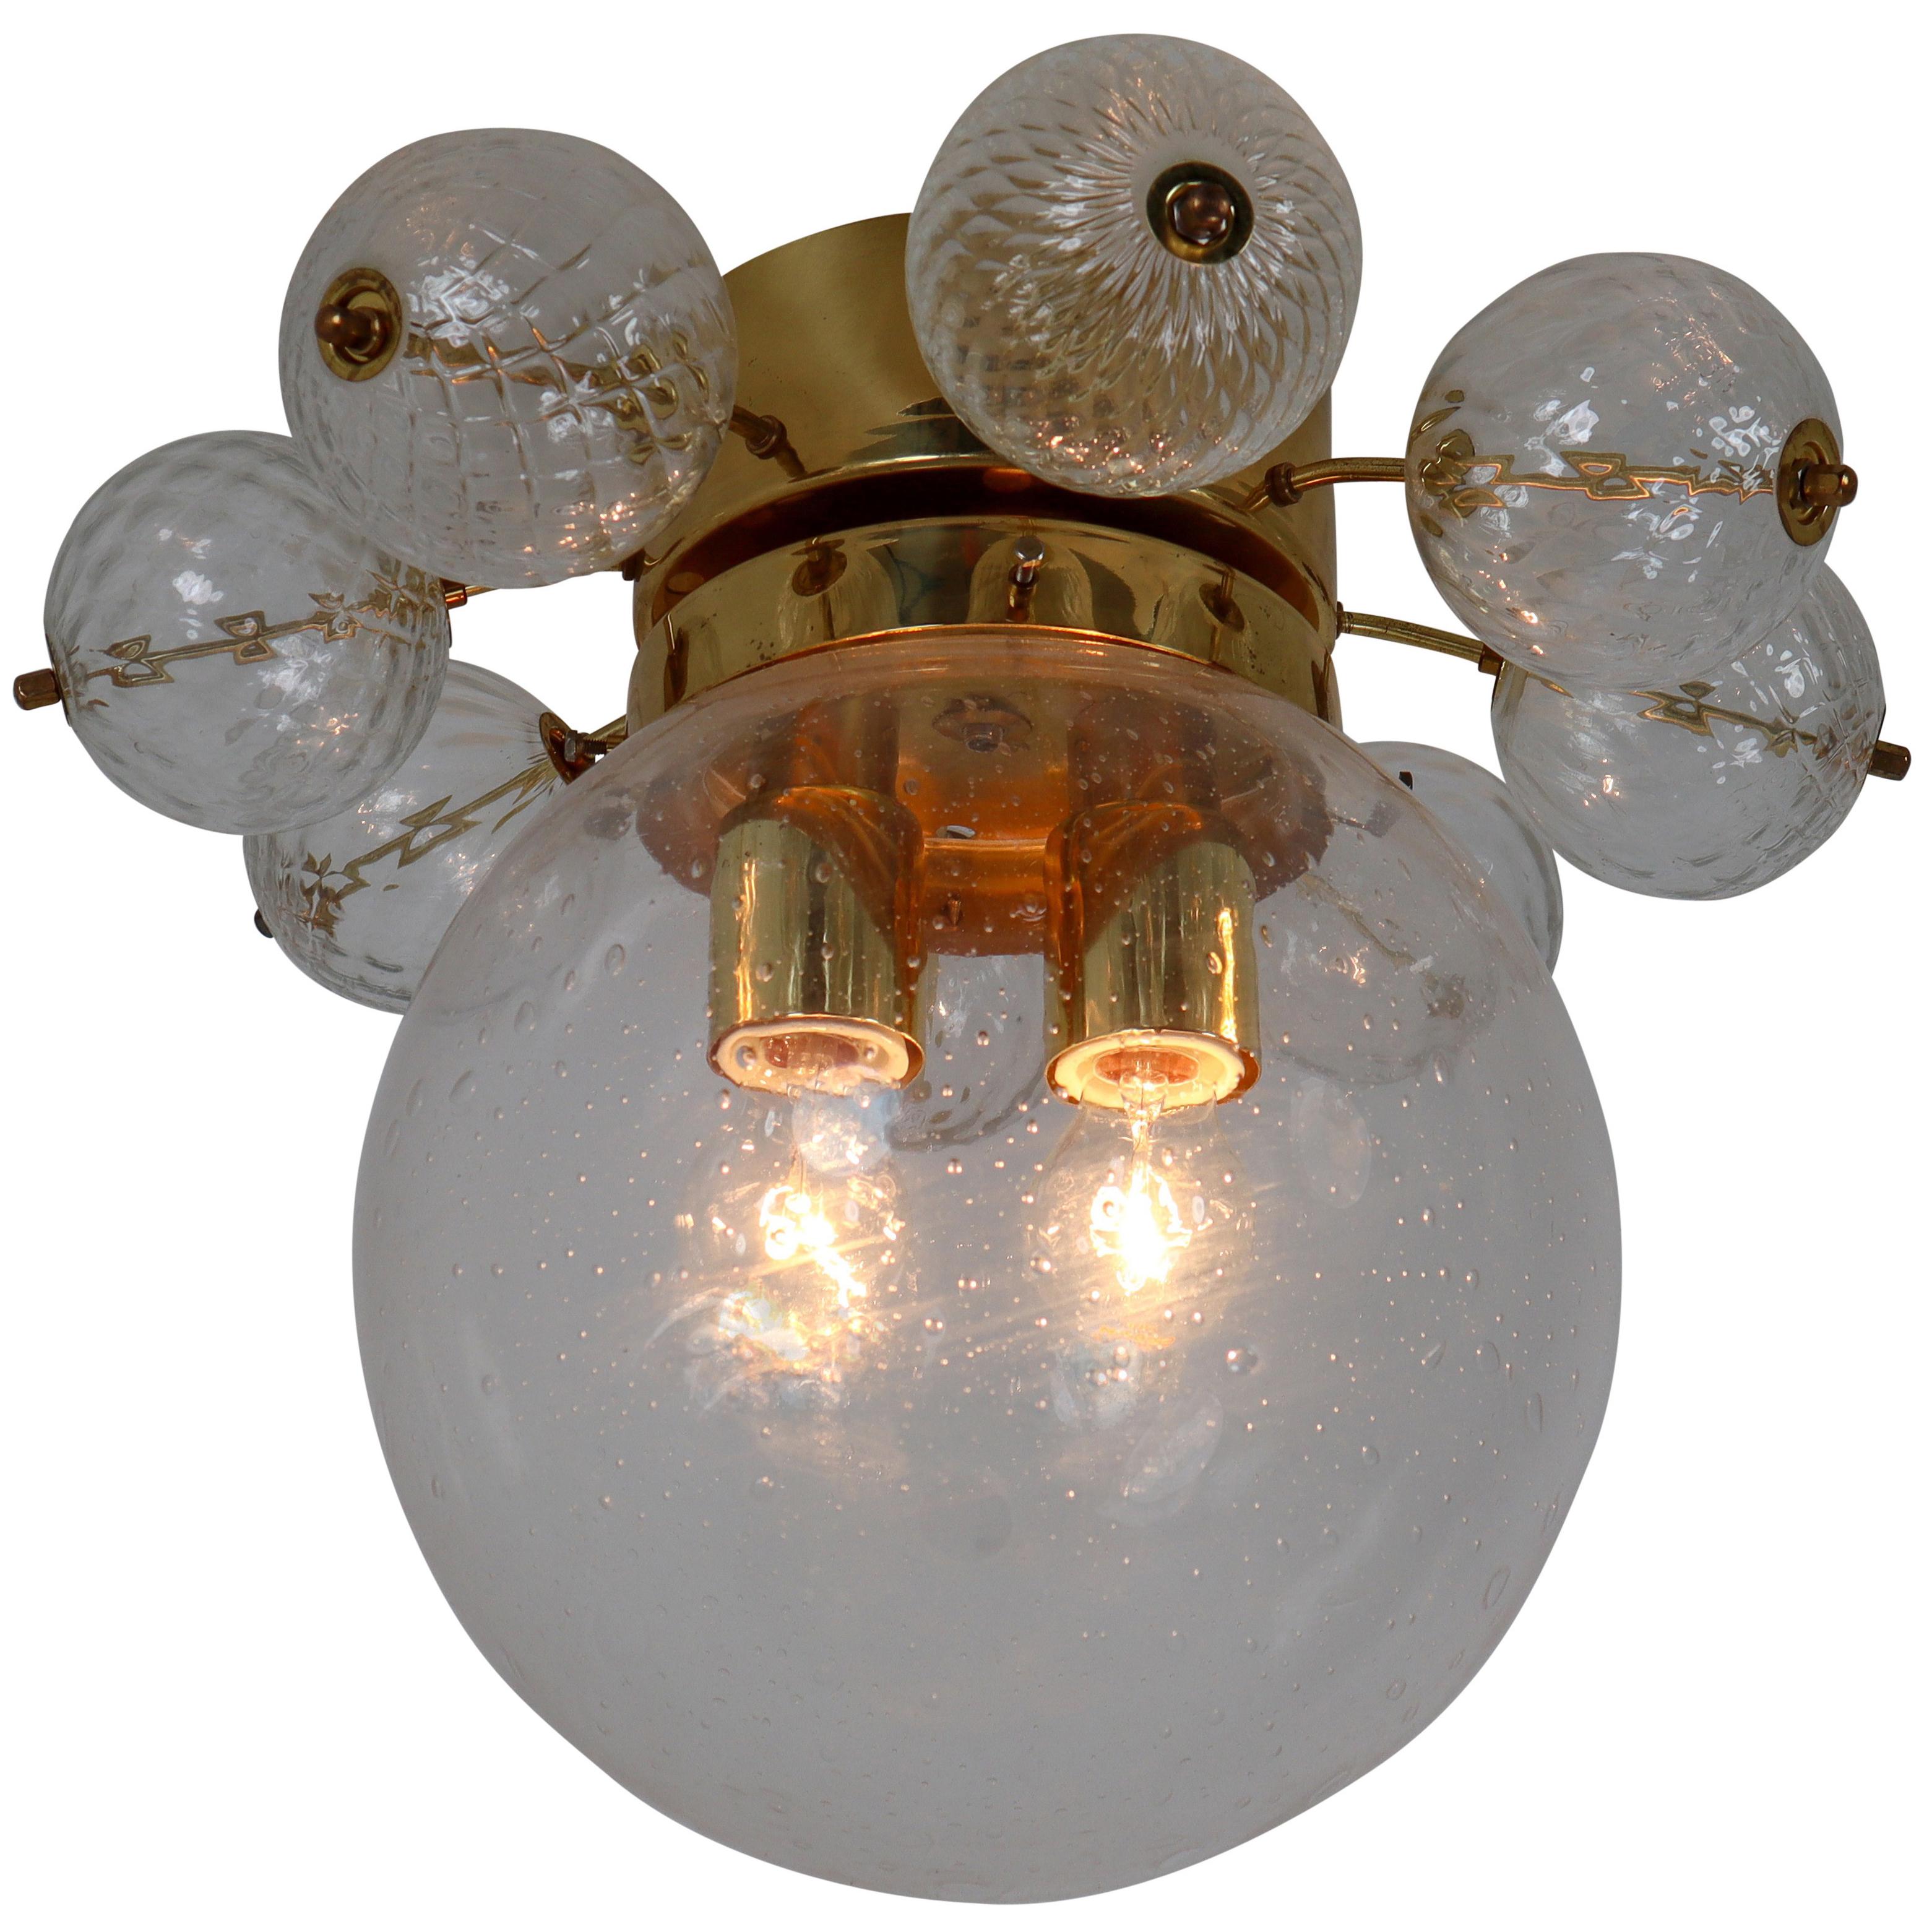 Set of Two Midcentury Brass Ceiling Lamp-Chandeliers with Handblown Glass